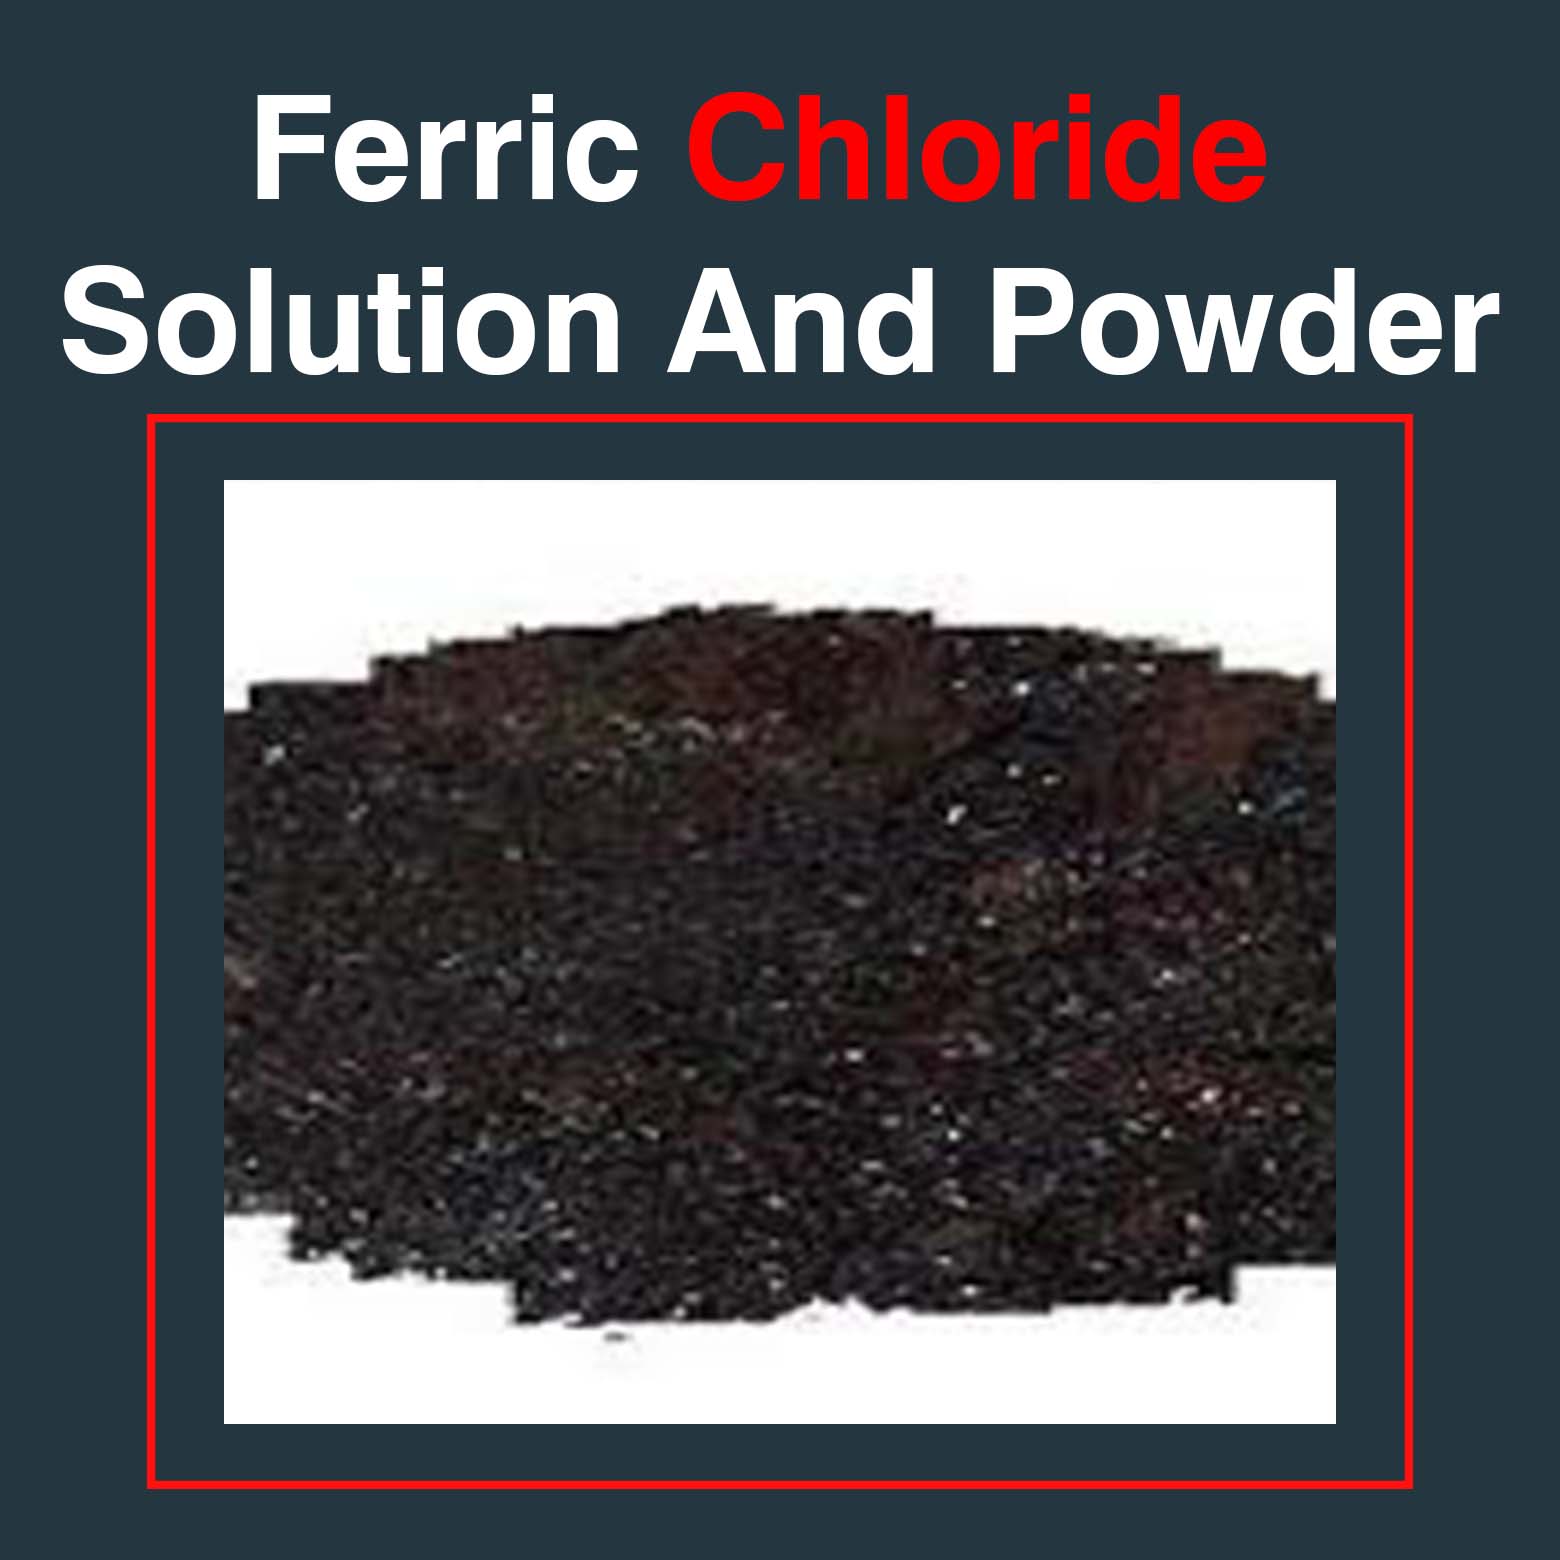 Ferric Chloride Solution And Powder In 